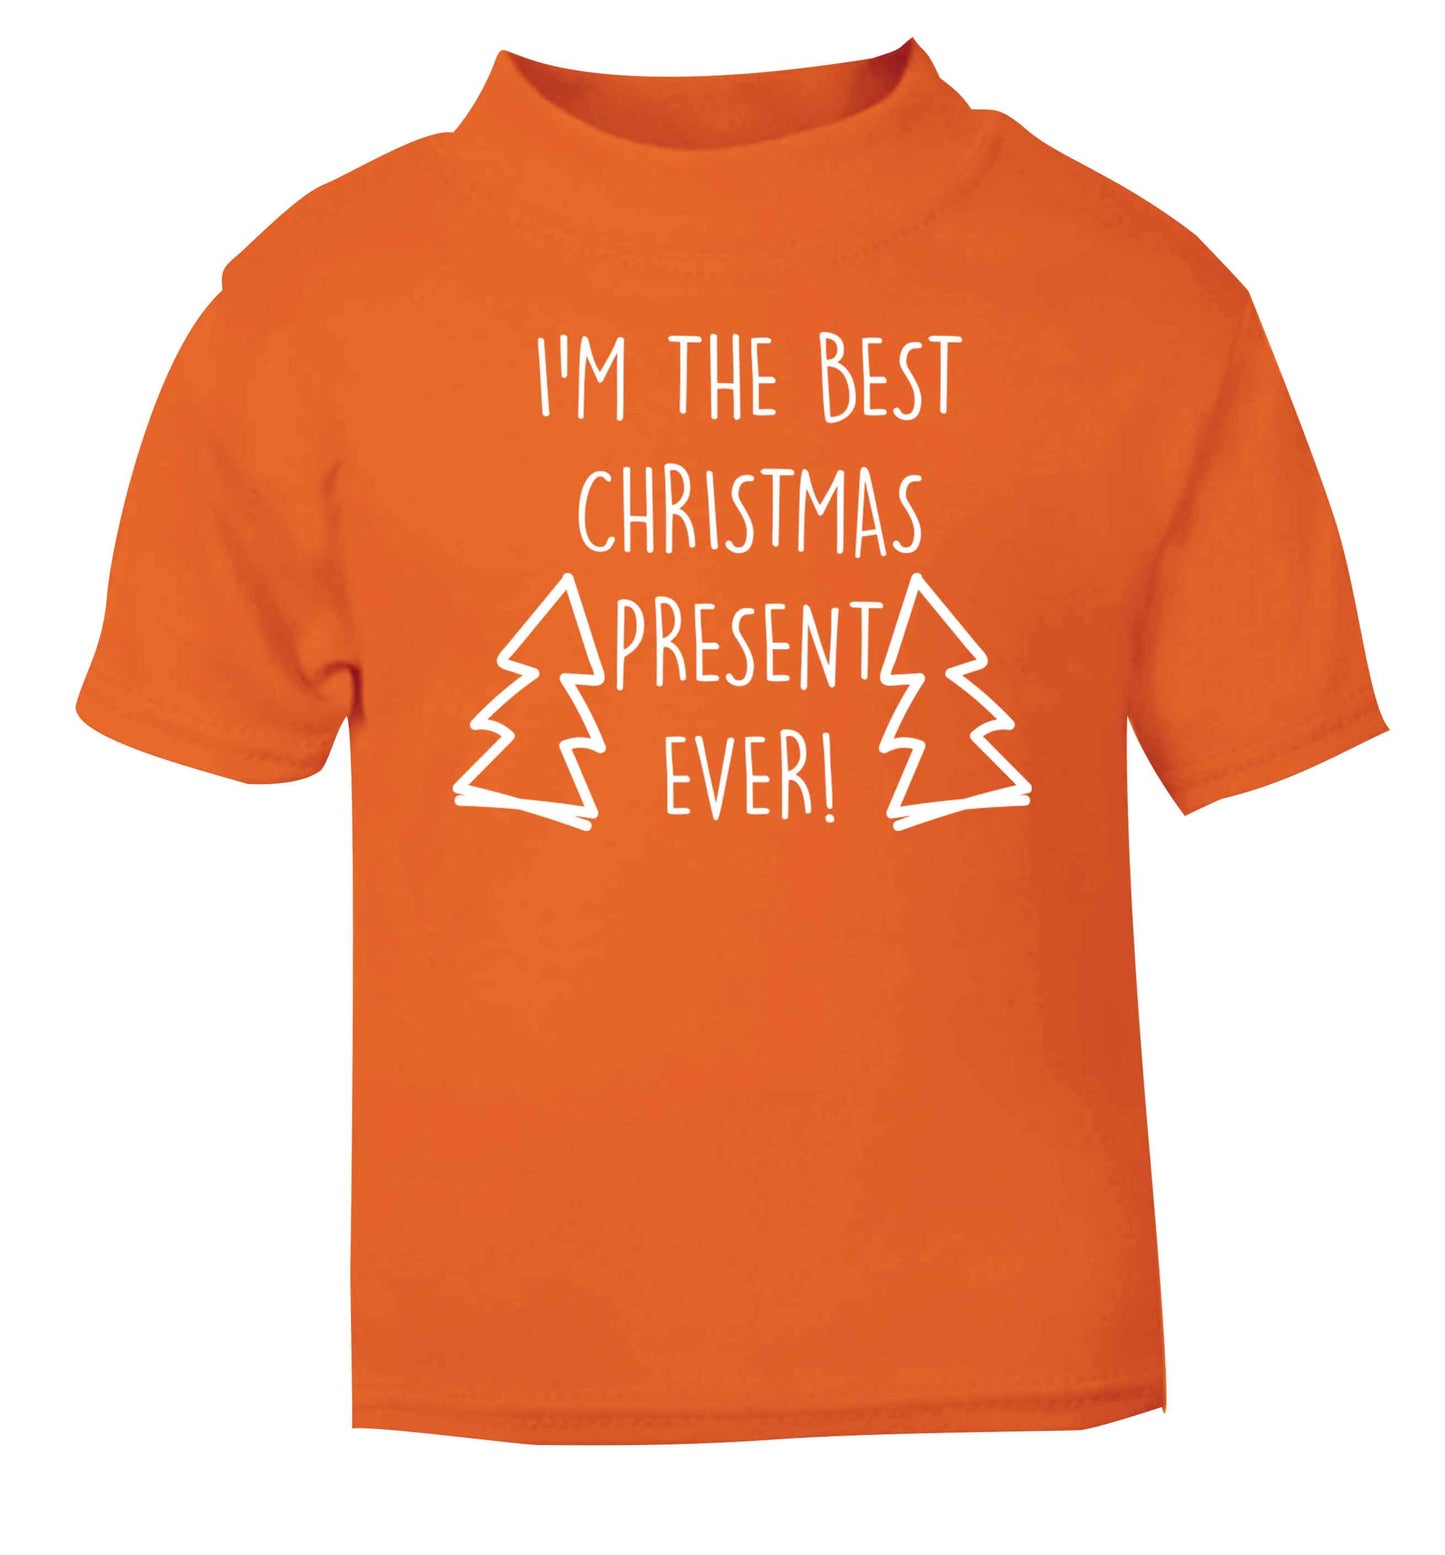 I'm the best Christmas present ever orange baby toddler Tshirt 2 Years